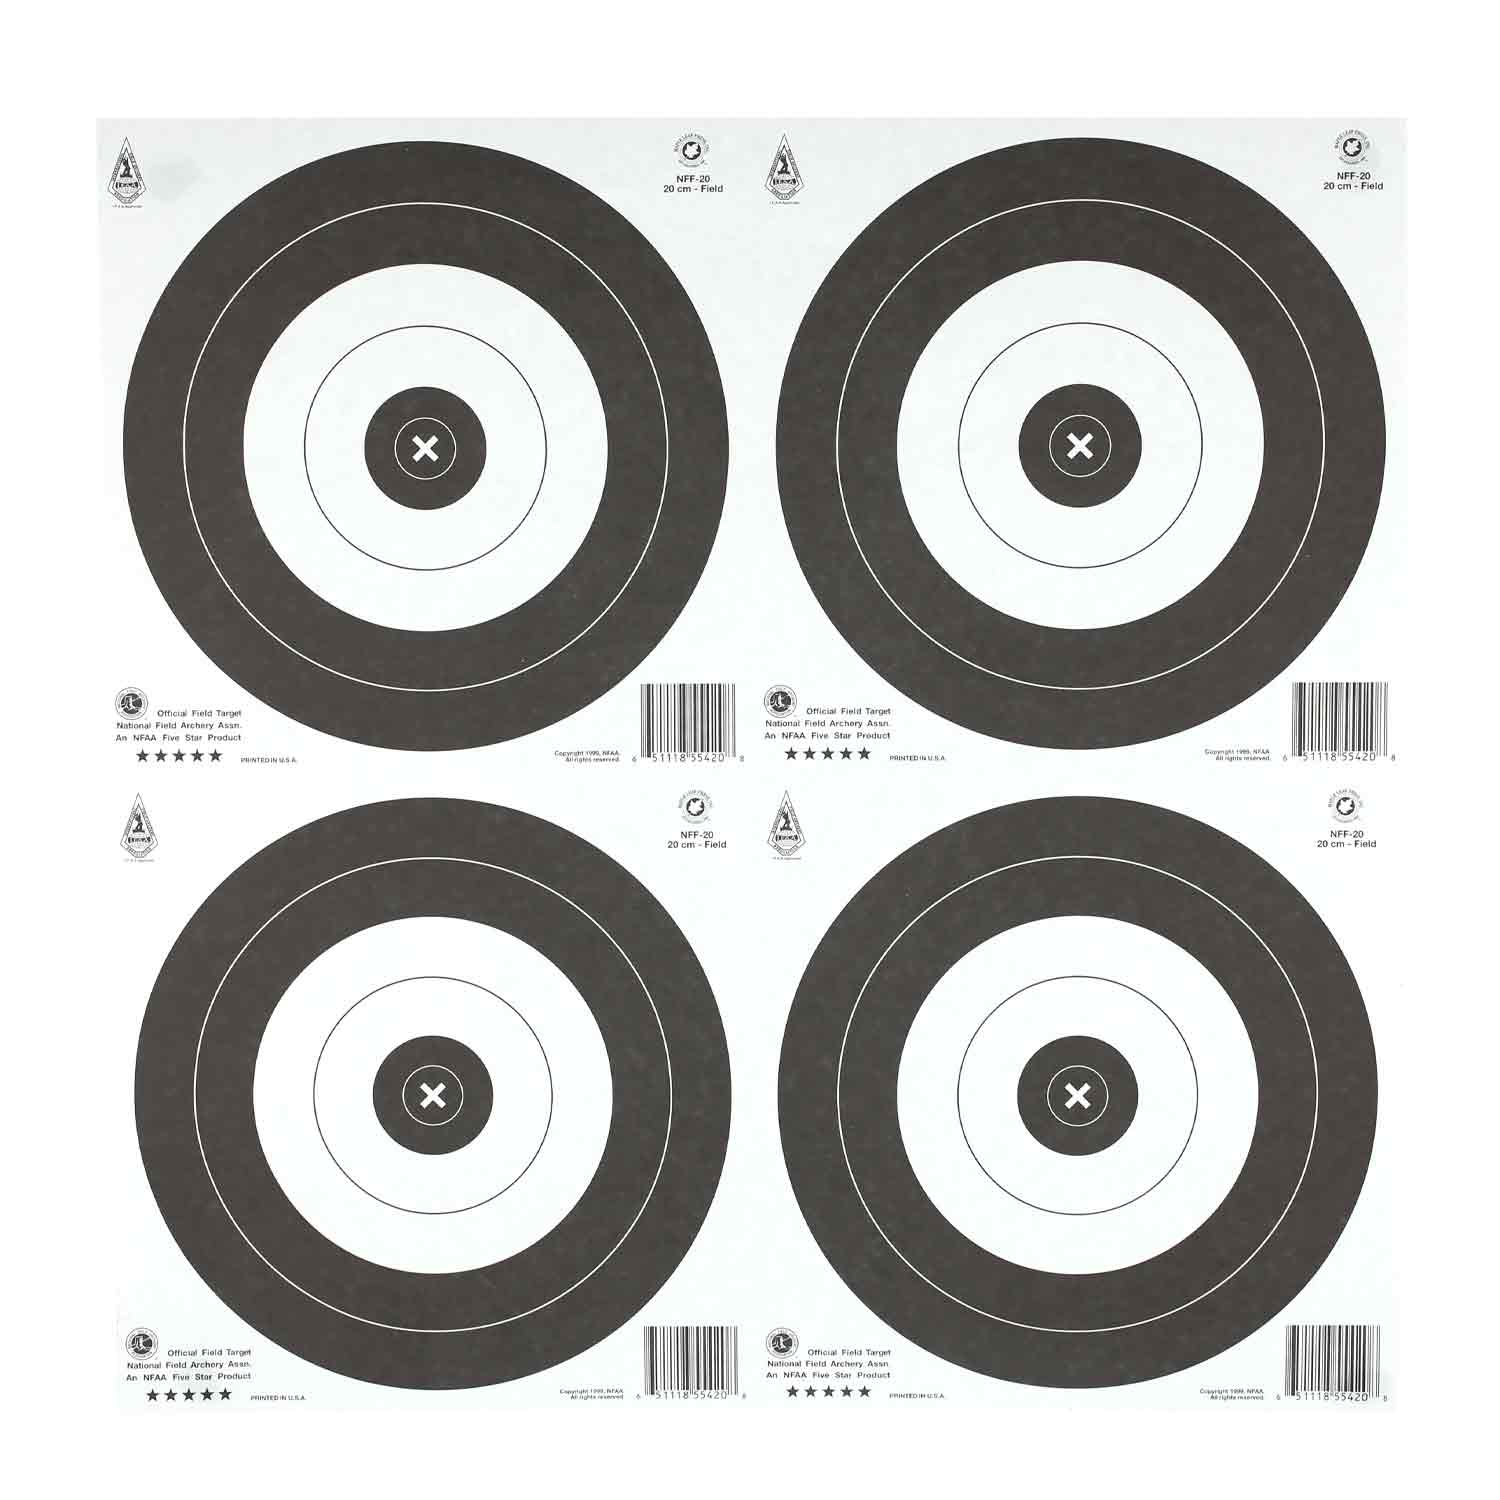 Maple Leaf 20cm NFAA Official Field Target Face